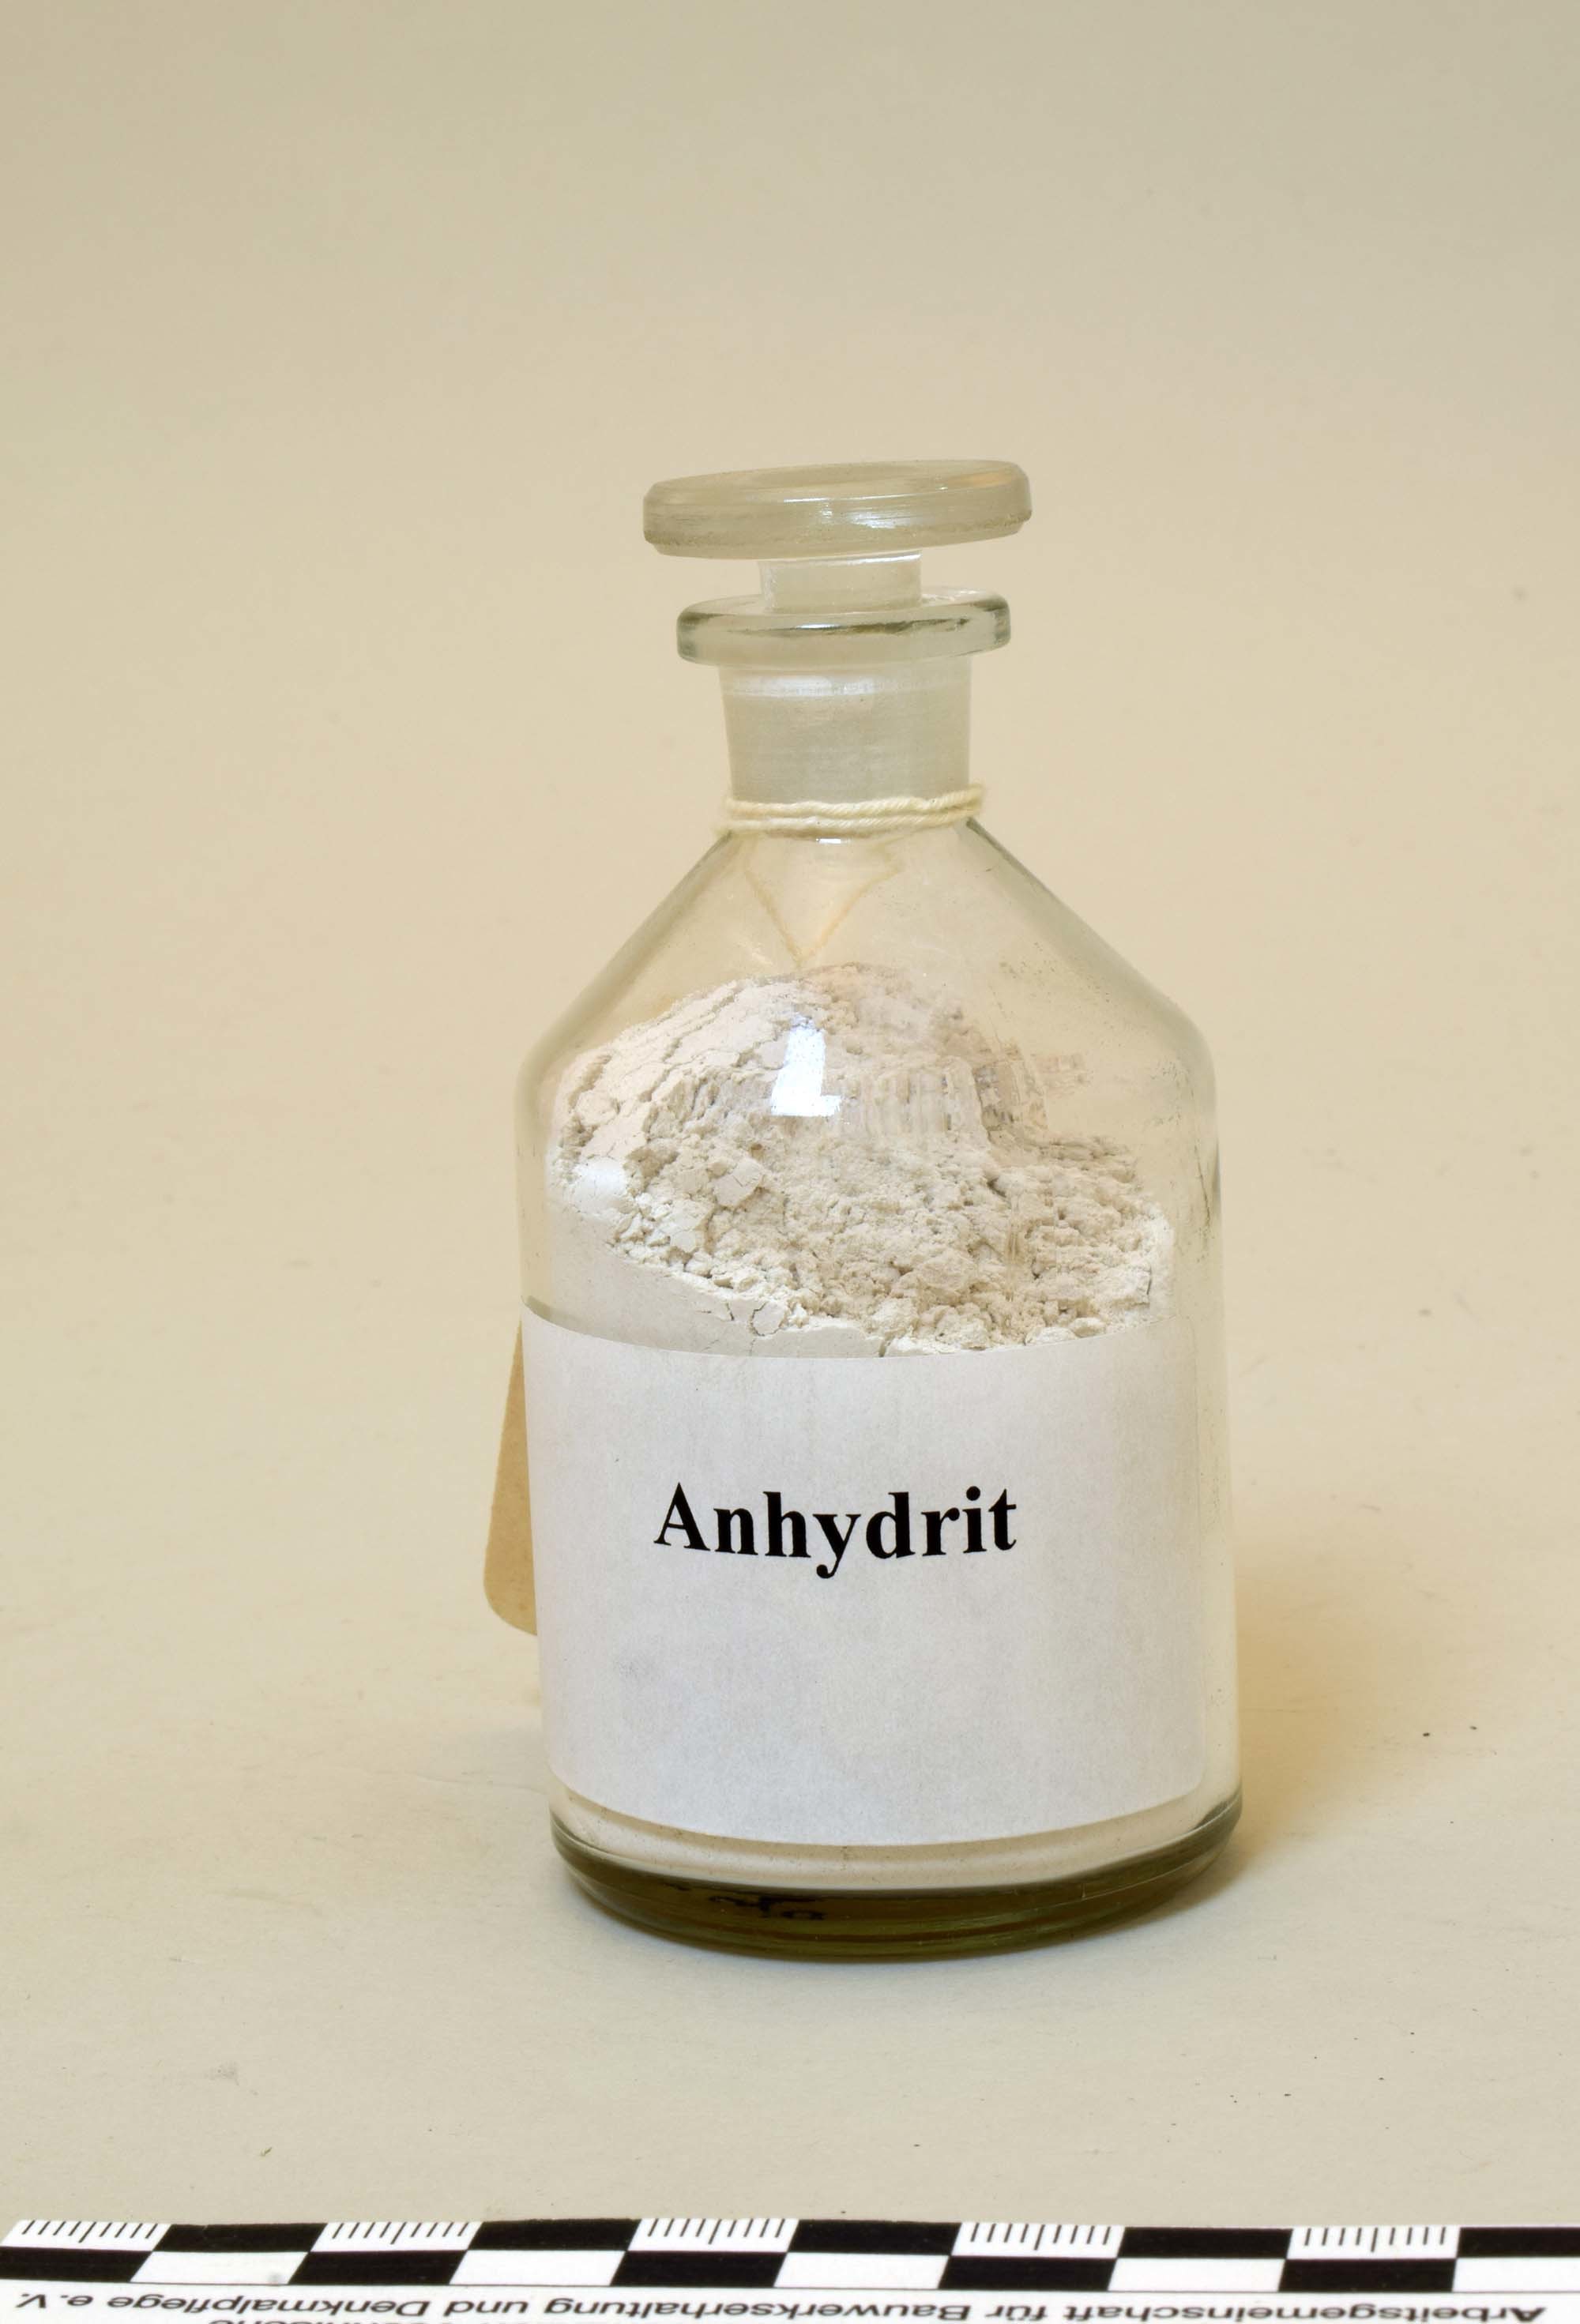 Laborflasche "Anhydrit" (Heimatmuseum Dohna CC BY-NC-SA)